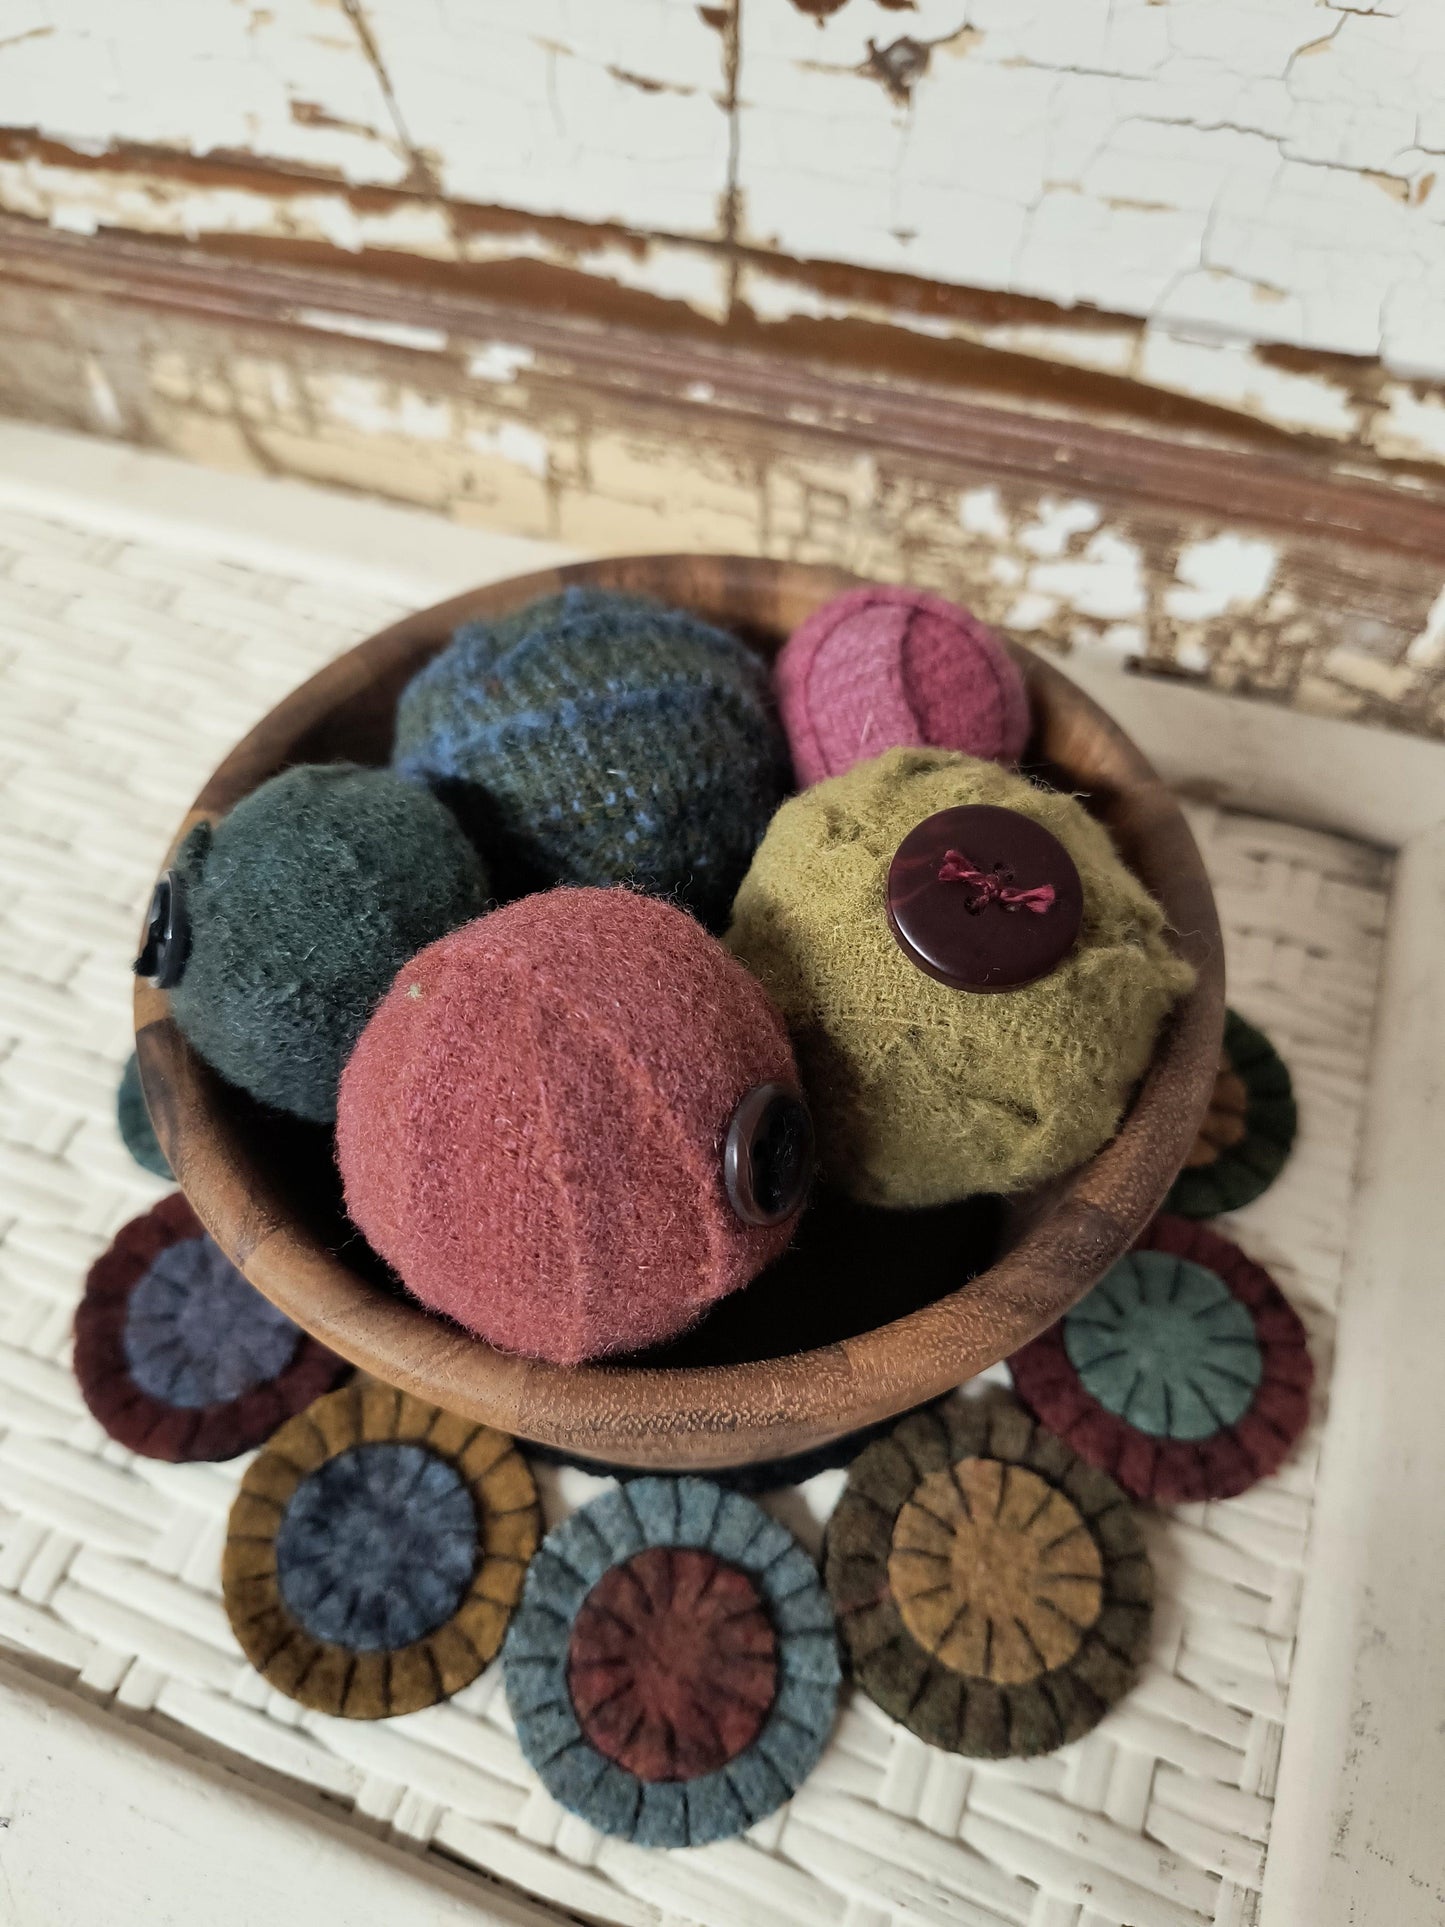 WOOL BALLS & BUTTONS Paper Pattern - All About Ewe Wool Shop